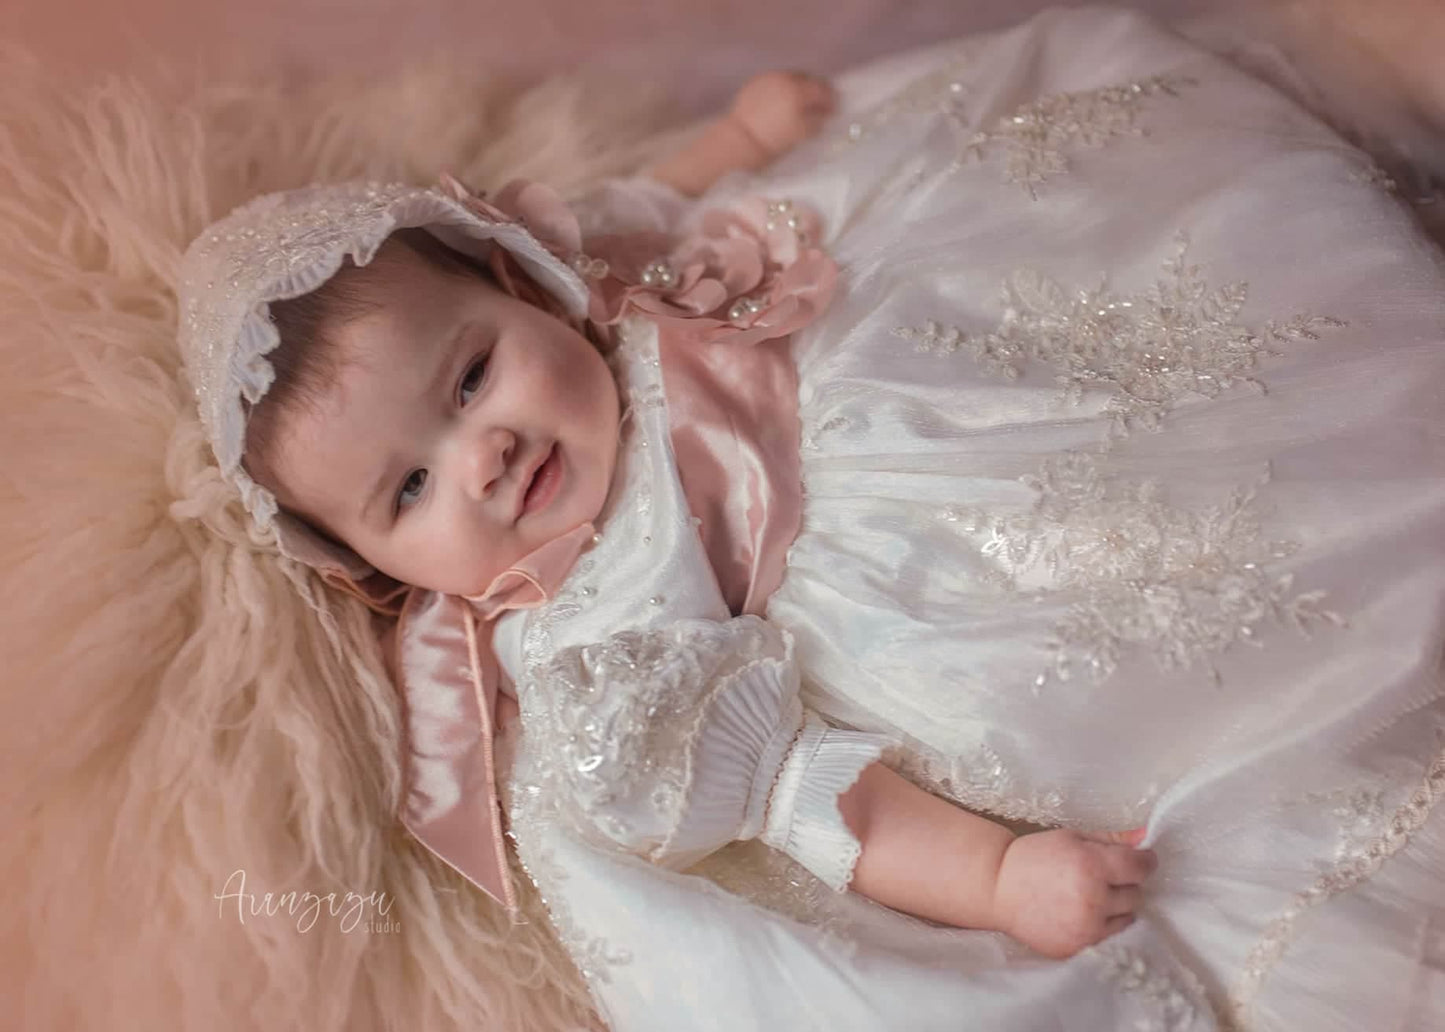 Ivory Baptism/Christening Gown